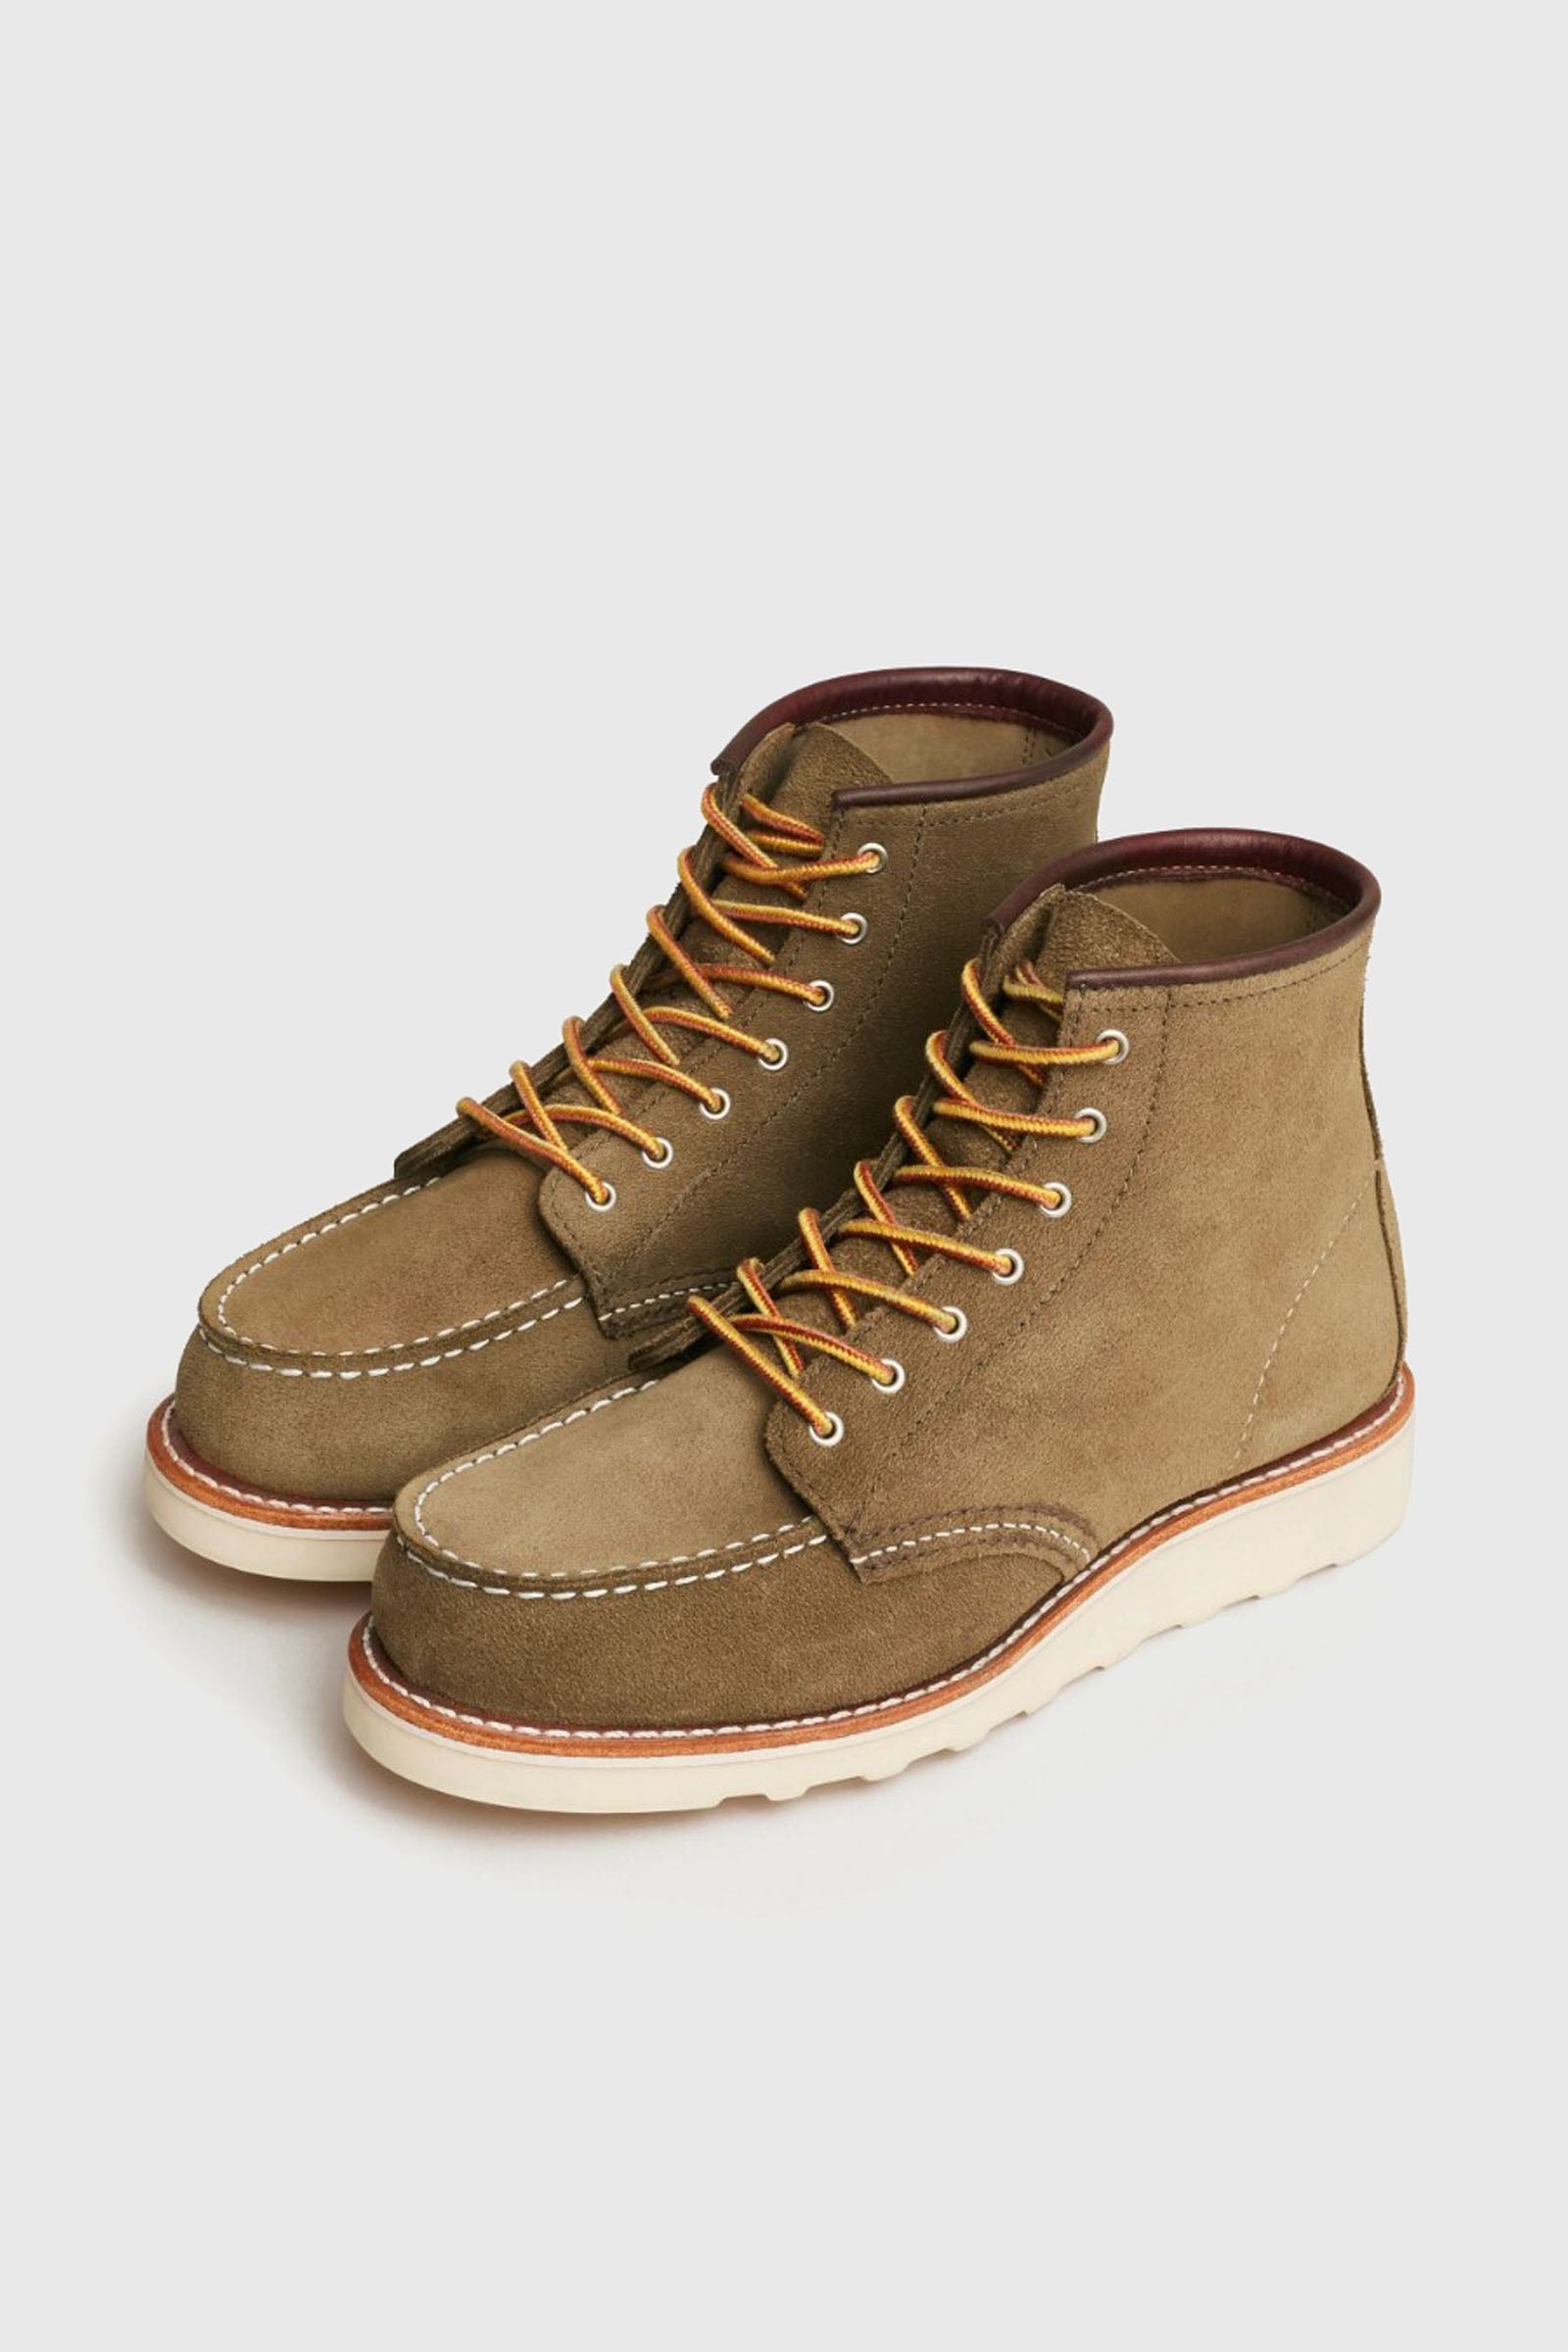 Red Wing Stivaletto 6-inch Classic Moc Toe In Pelle Mohave Verde Oliva Uomo - 4